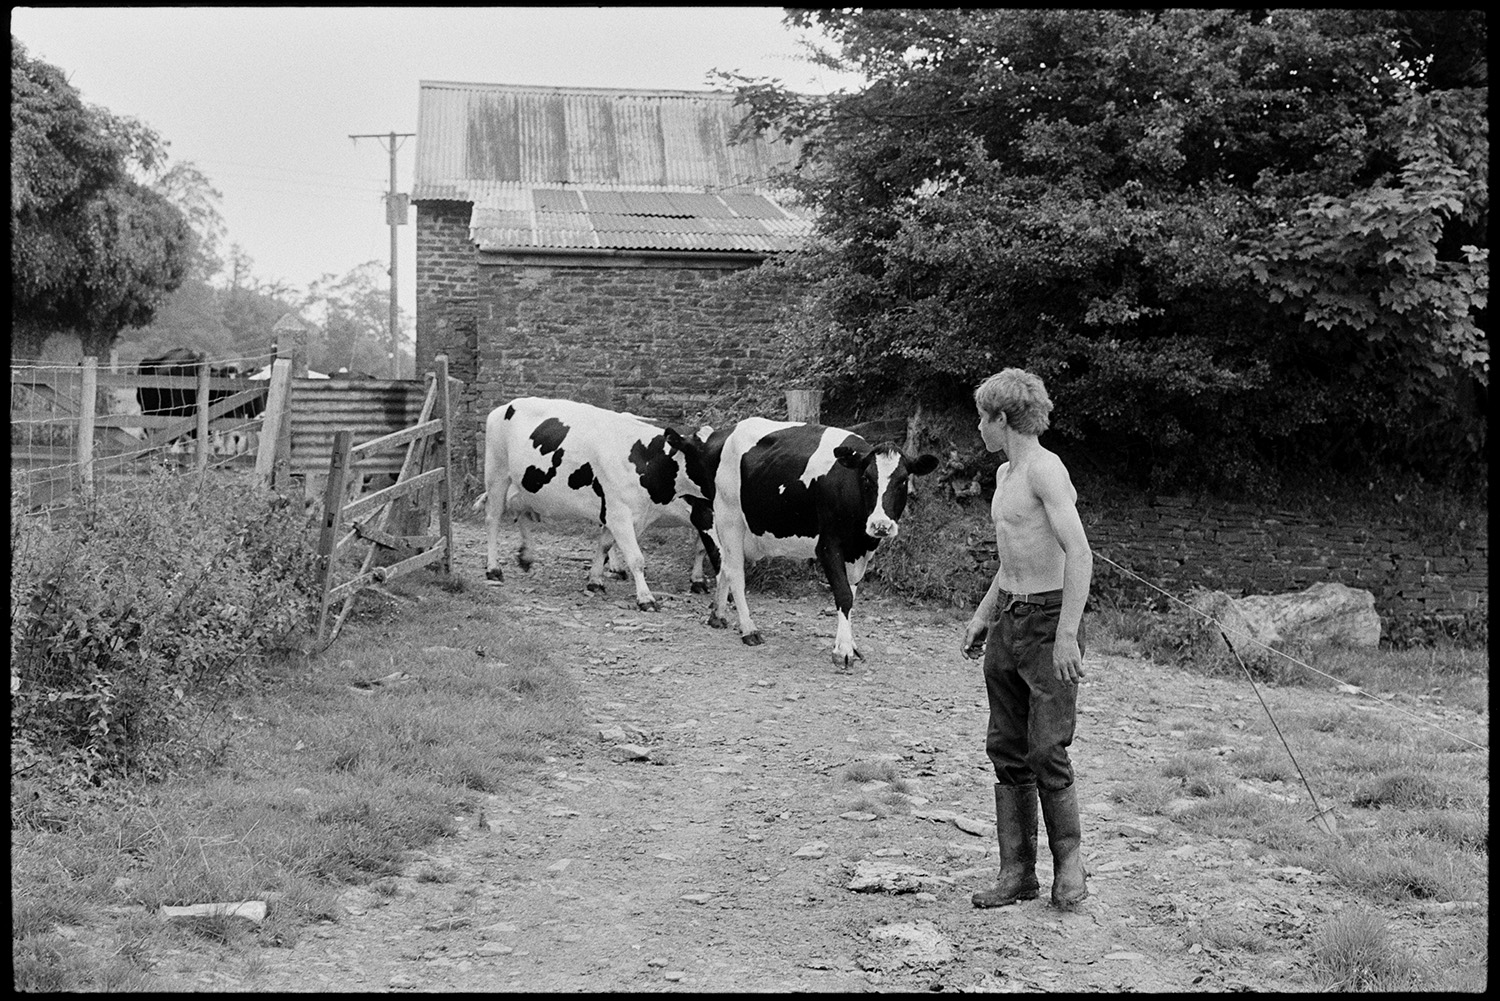 Cows in farmyard, cat. 
[A boy leading cows along a path in a farmyard at Ashbury. A stone barn with a corrugated iron roof can be seen in the background.]